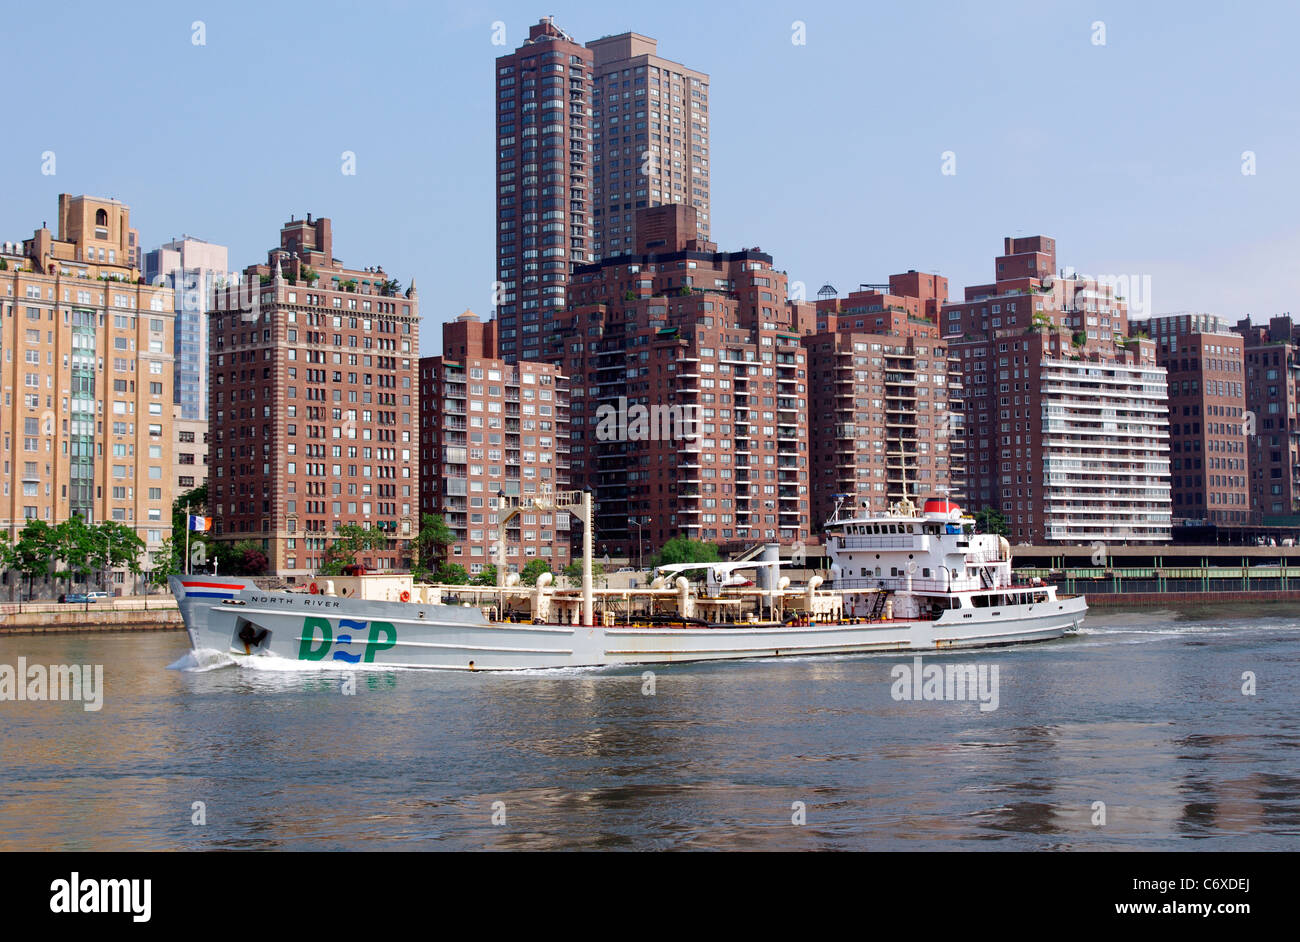 New York Department of Environmental Protection sludge vessel 'North River' transporting sludge to dewatering site. Stock Photo